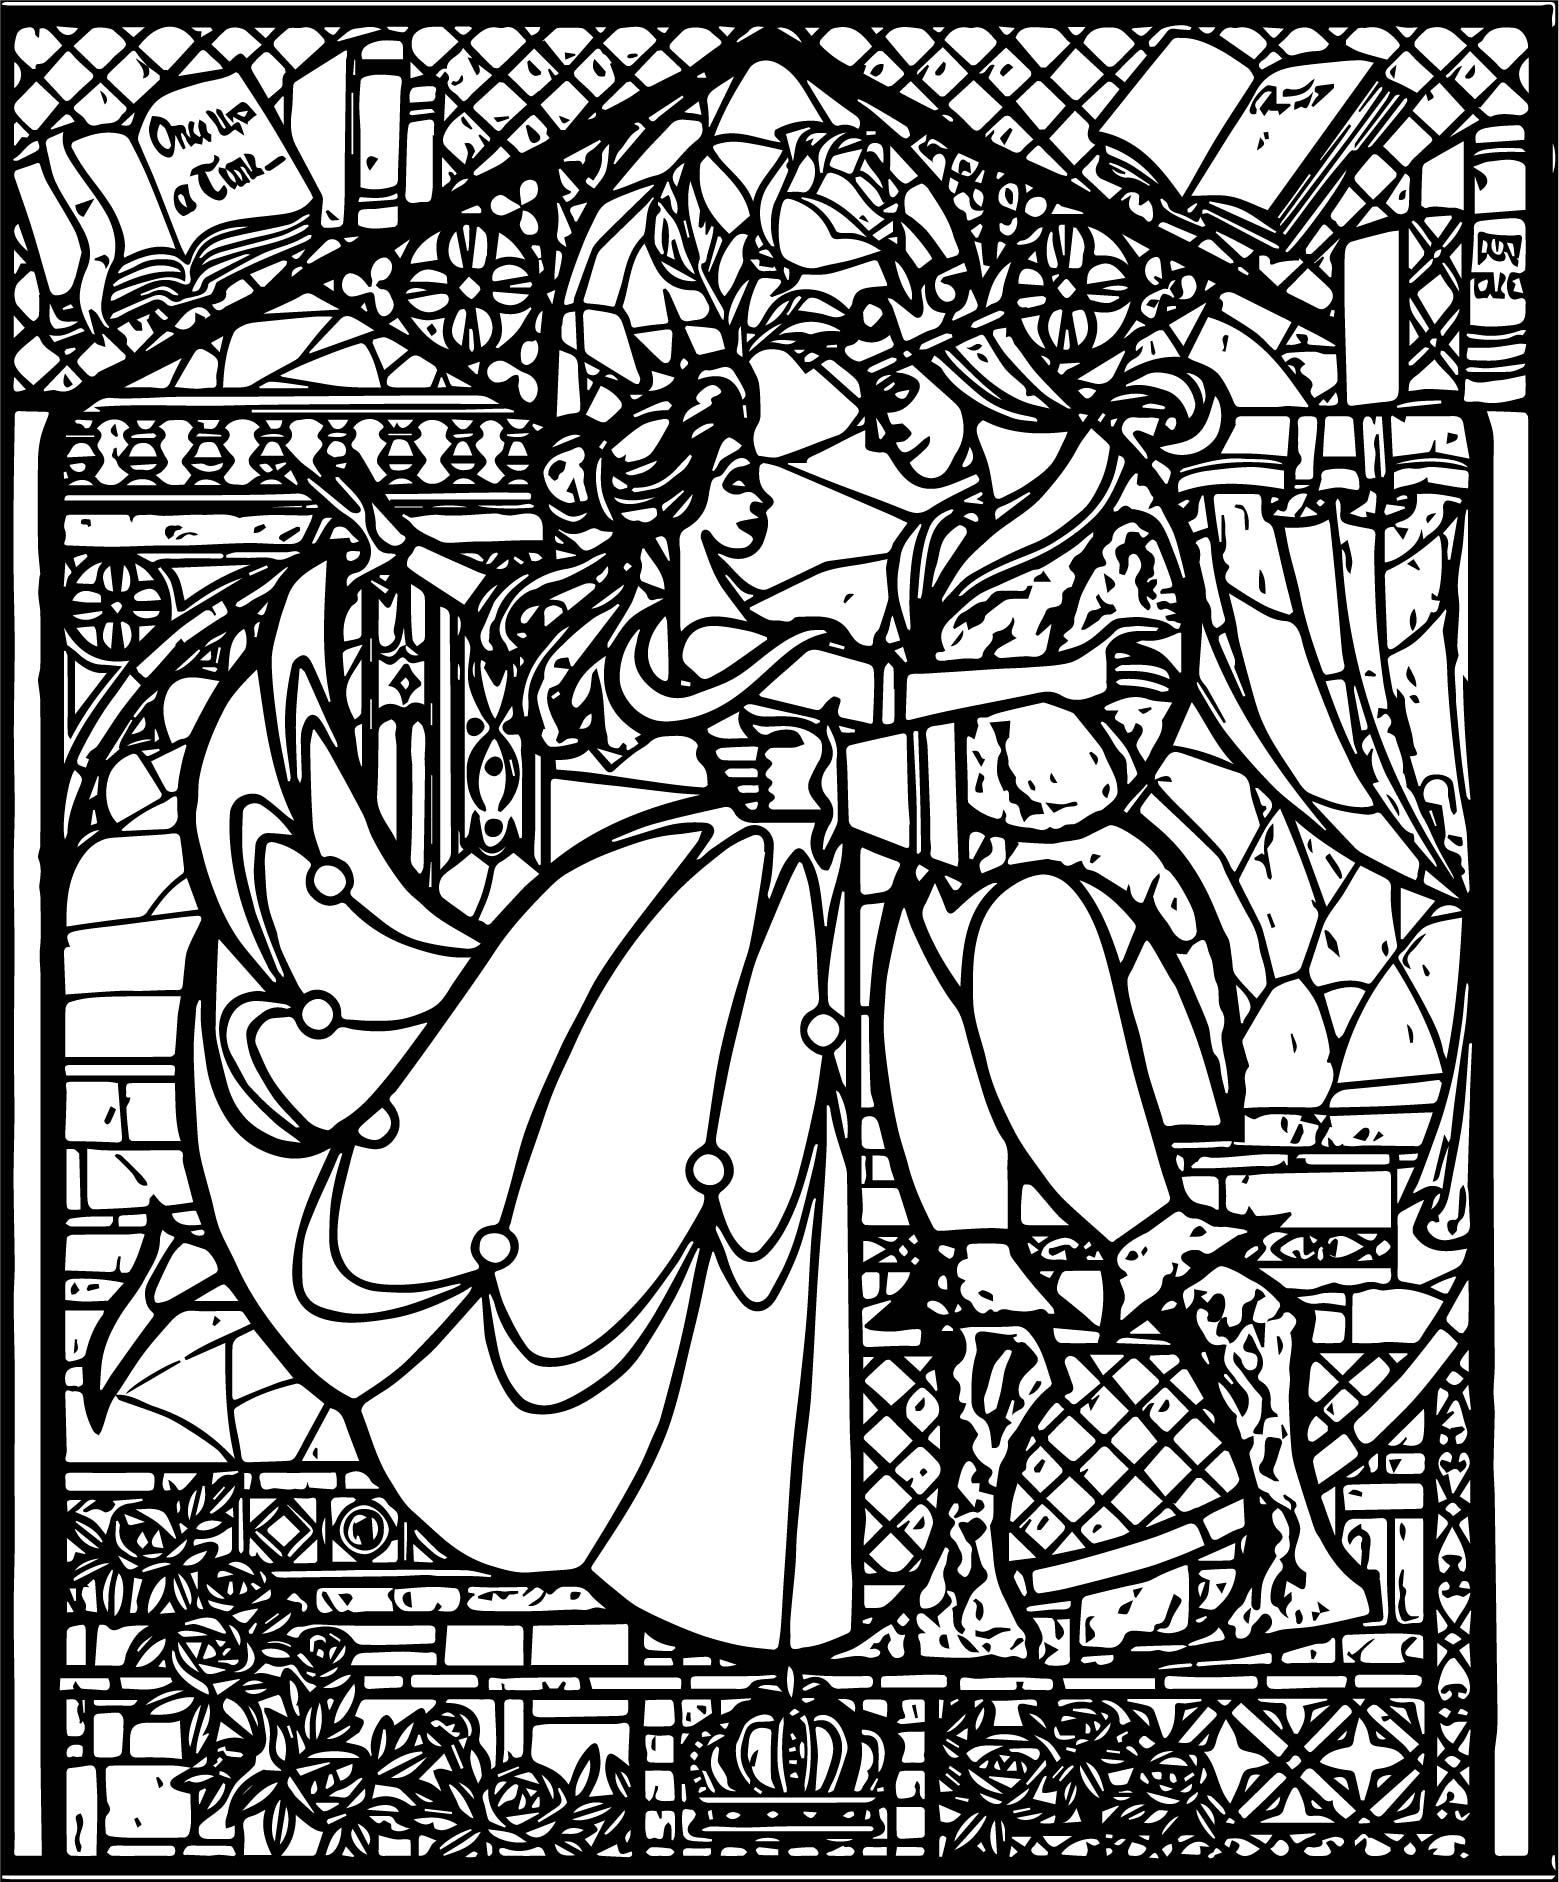 Stained glass coloring pages for adults